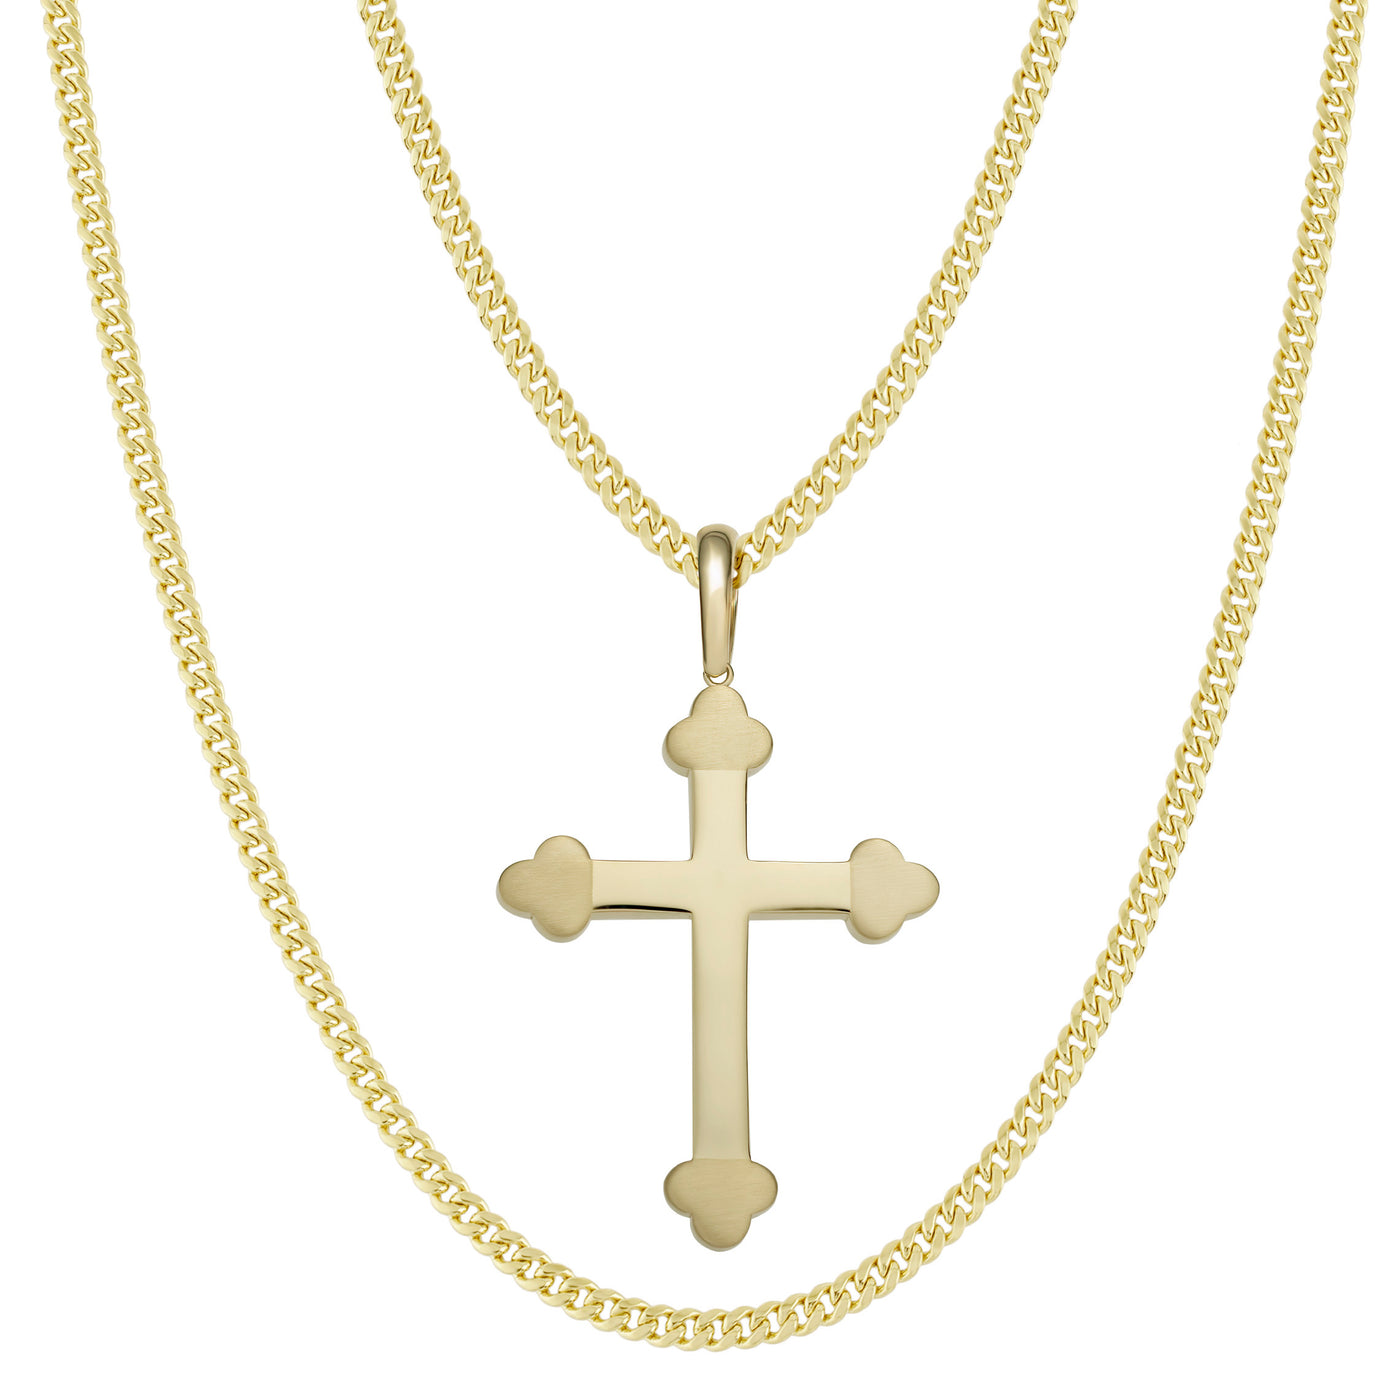 2 1/4" Textured Cross Pendant & Chain Necklace Set 10K Yellow Gold